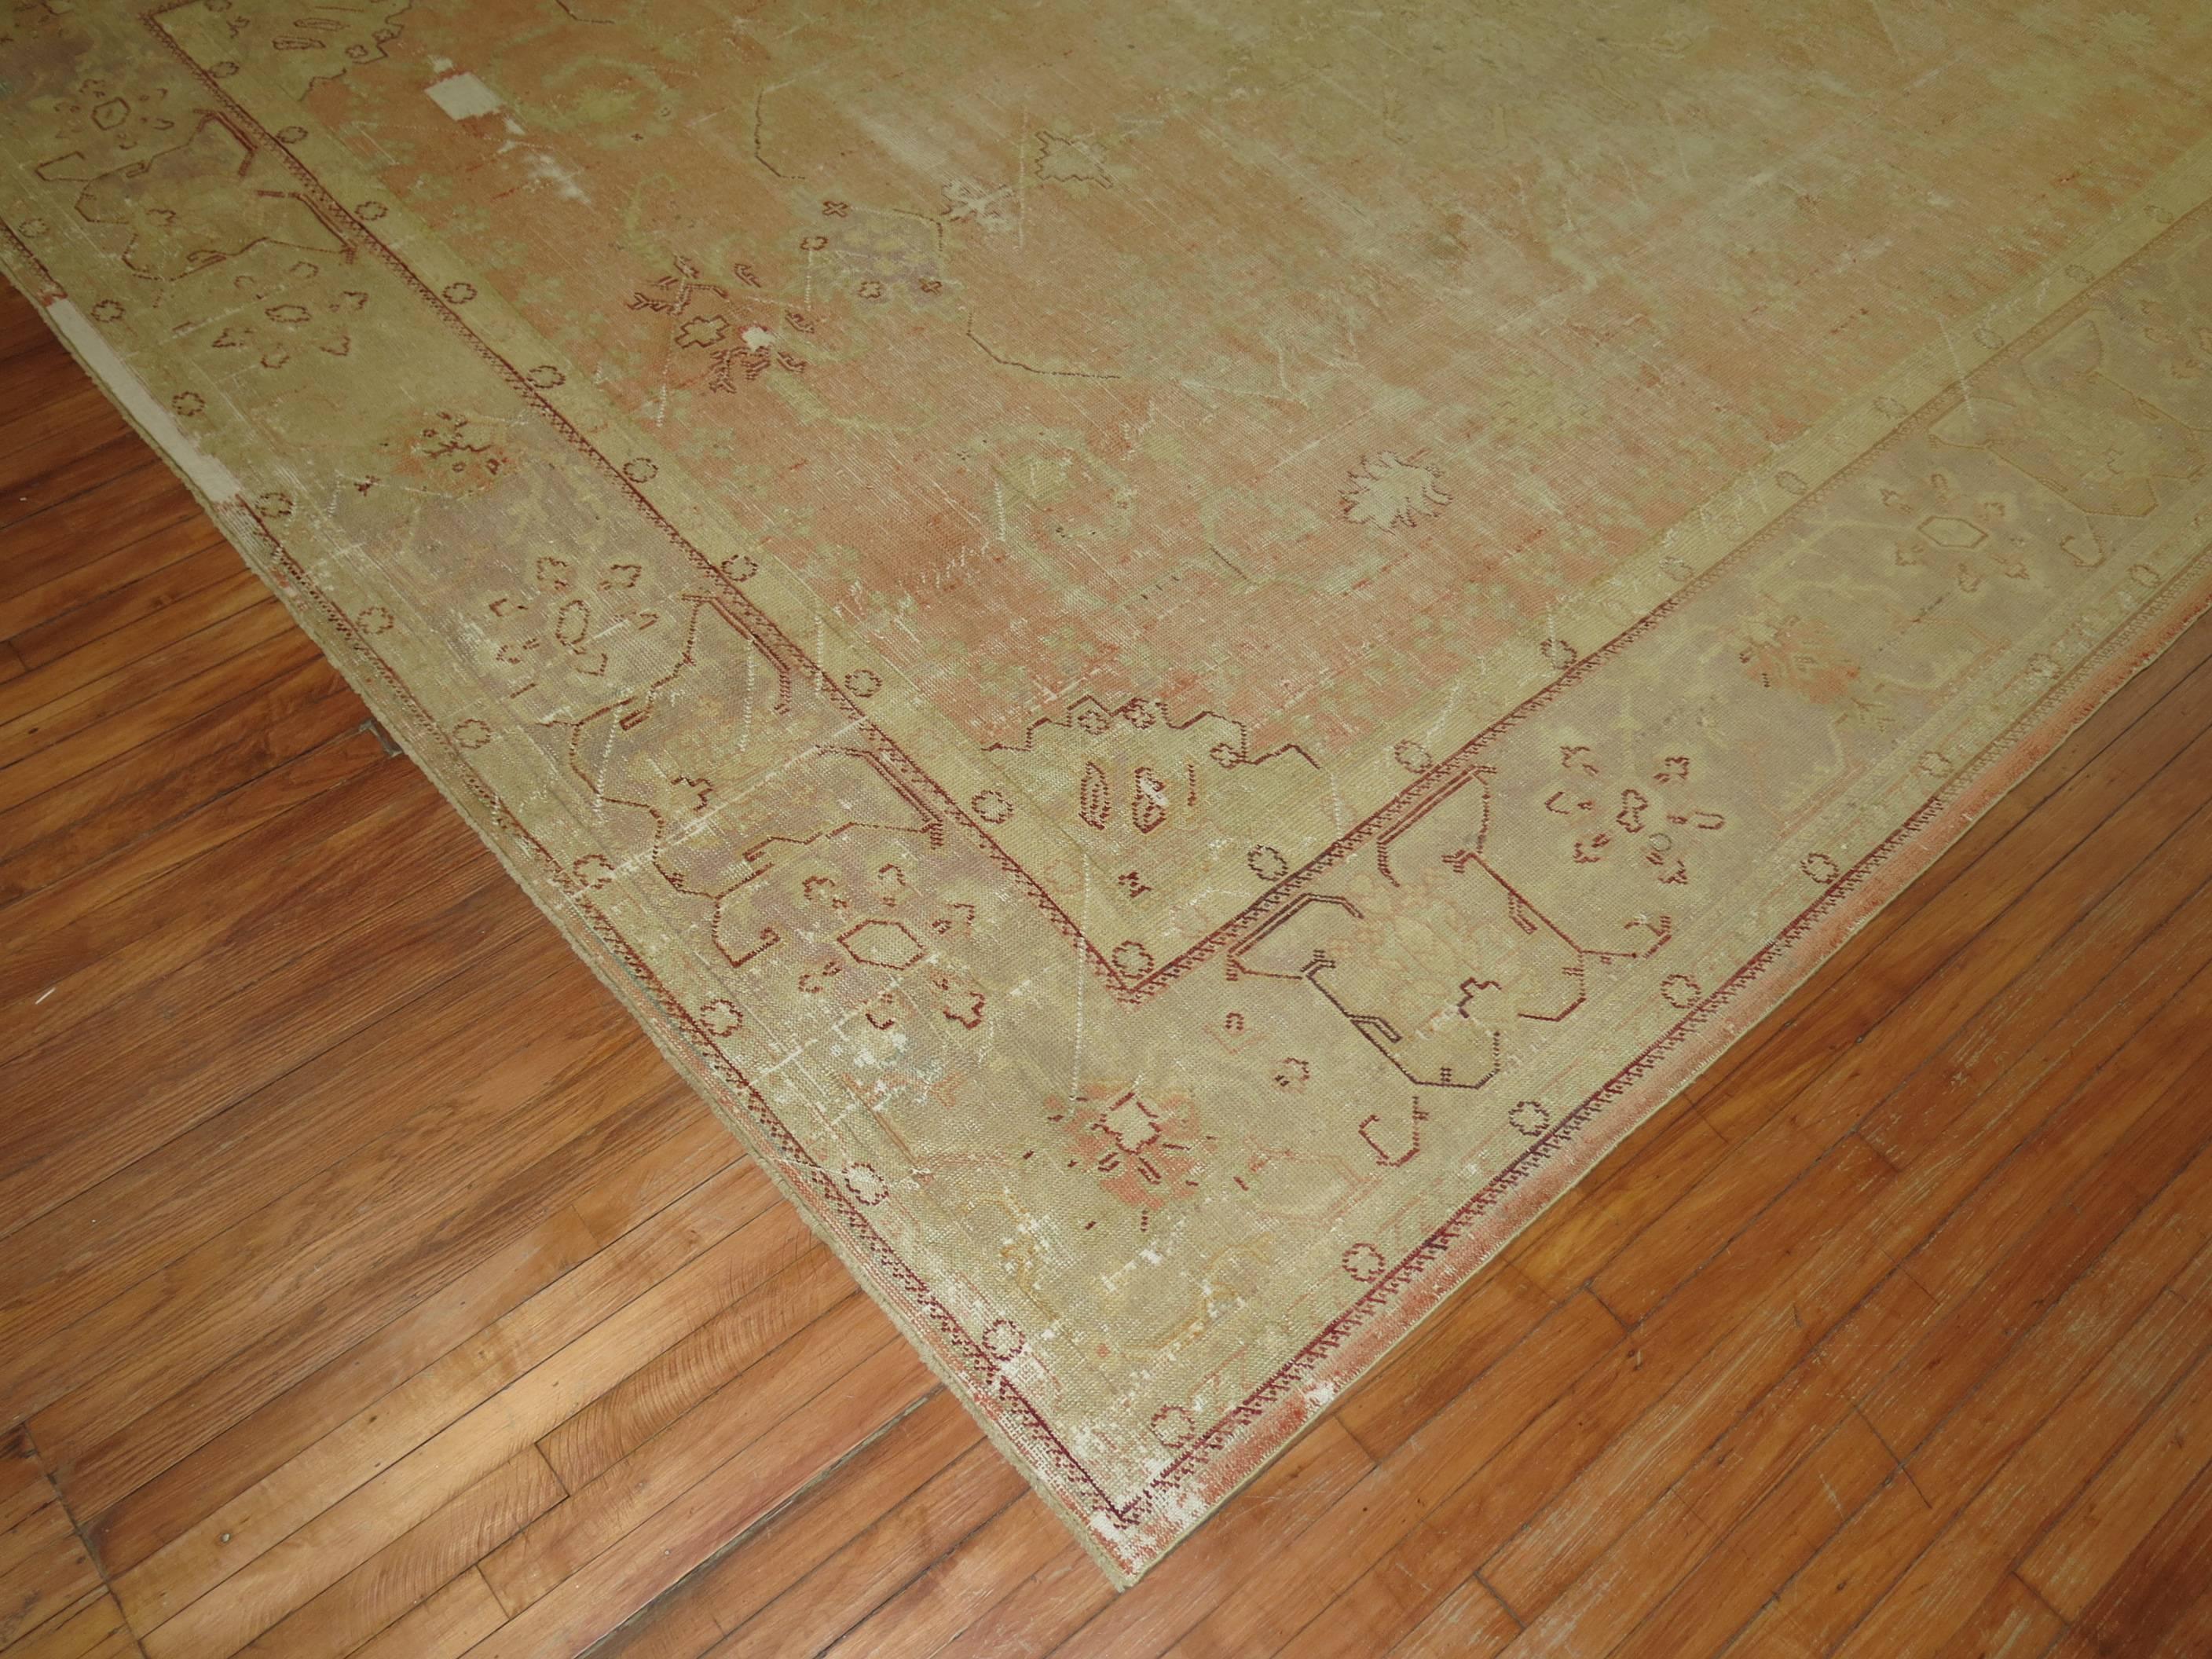 Shabby Chic Antique Oushak Carpet In Fair Condition For Sale In New York, NY